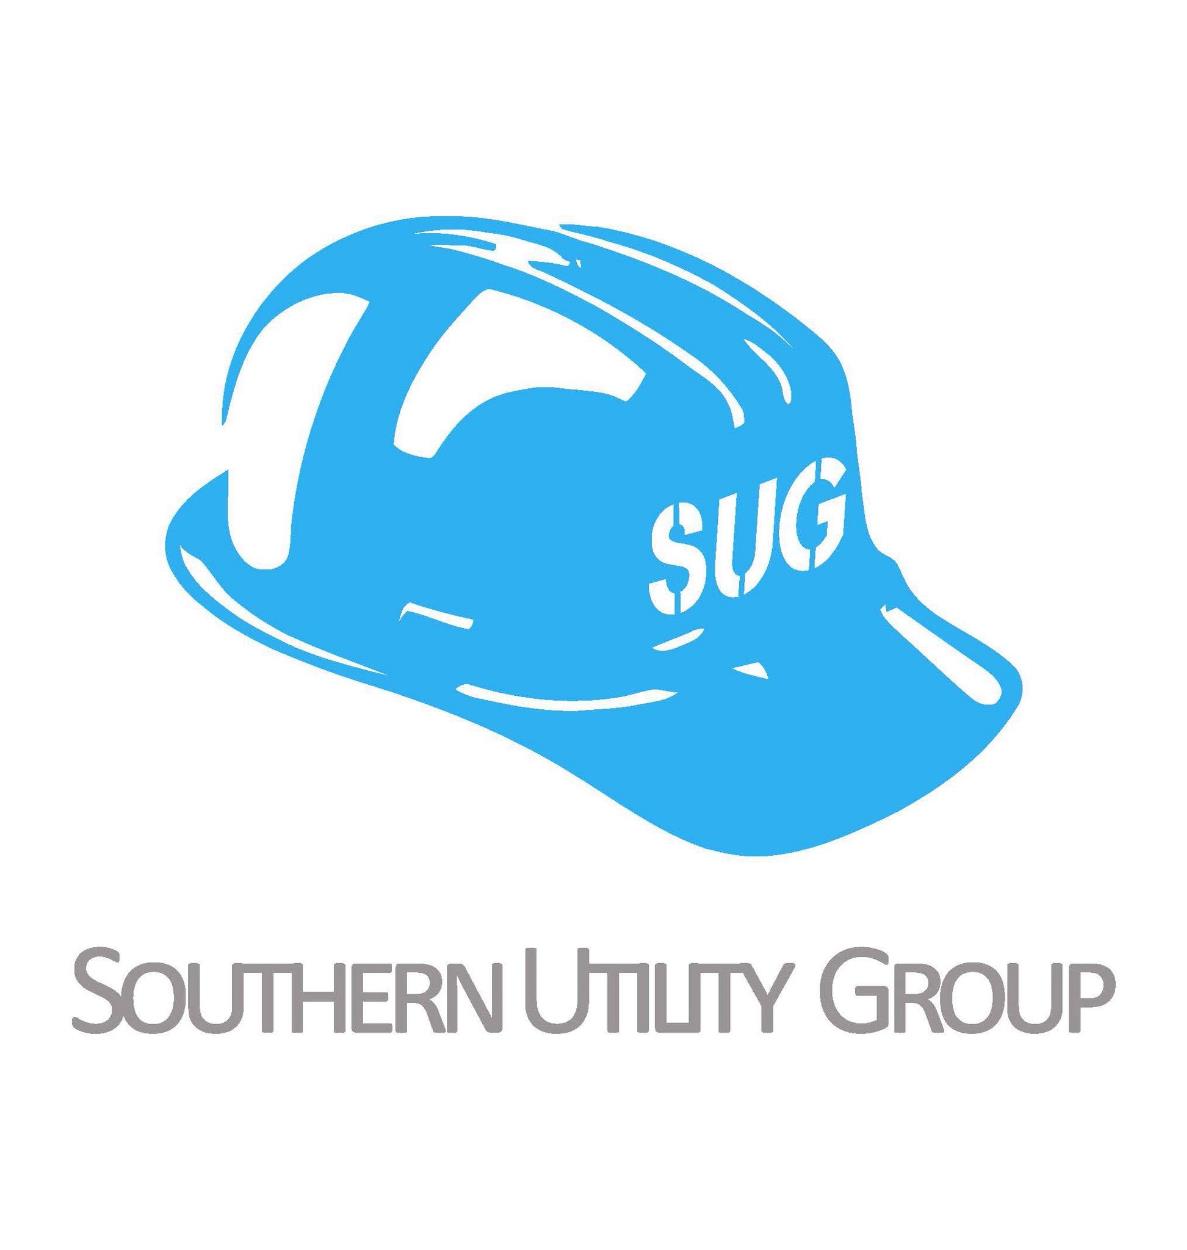 Southern Utility Group